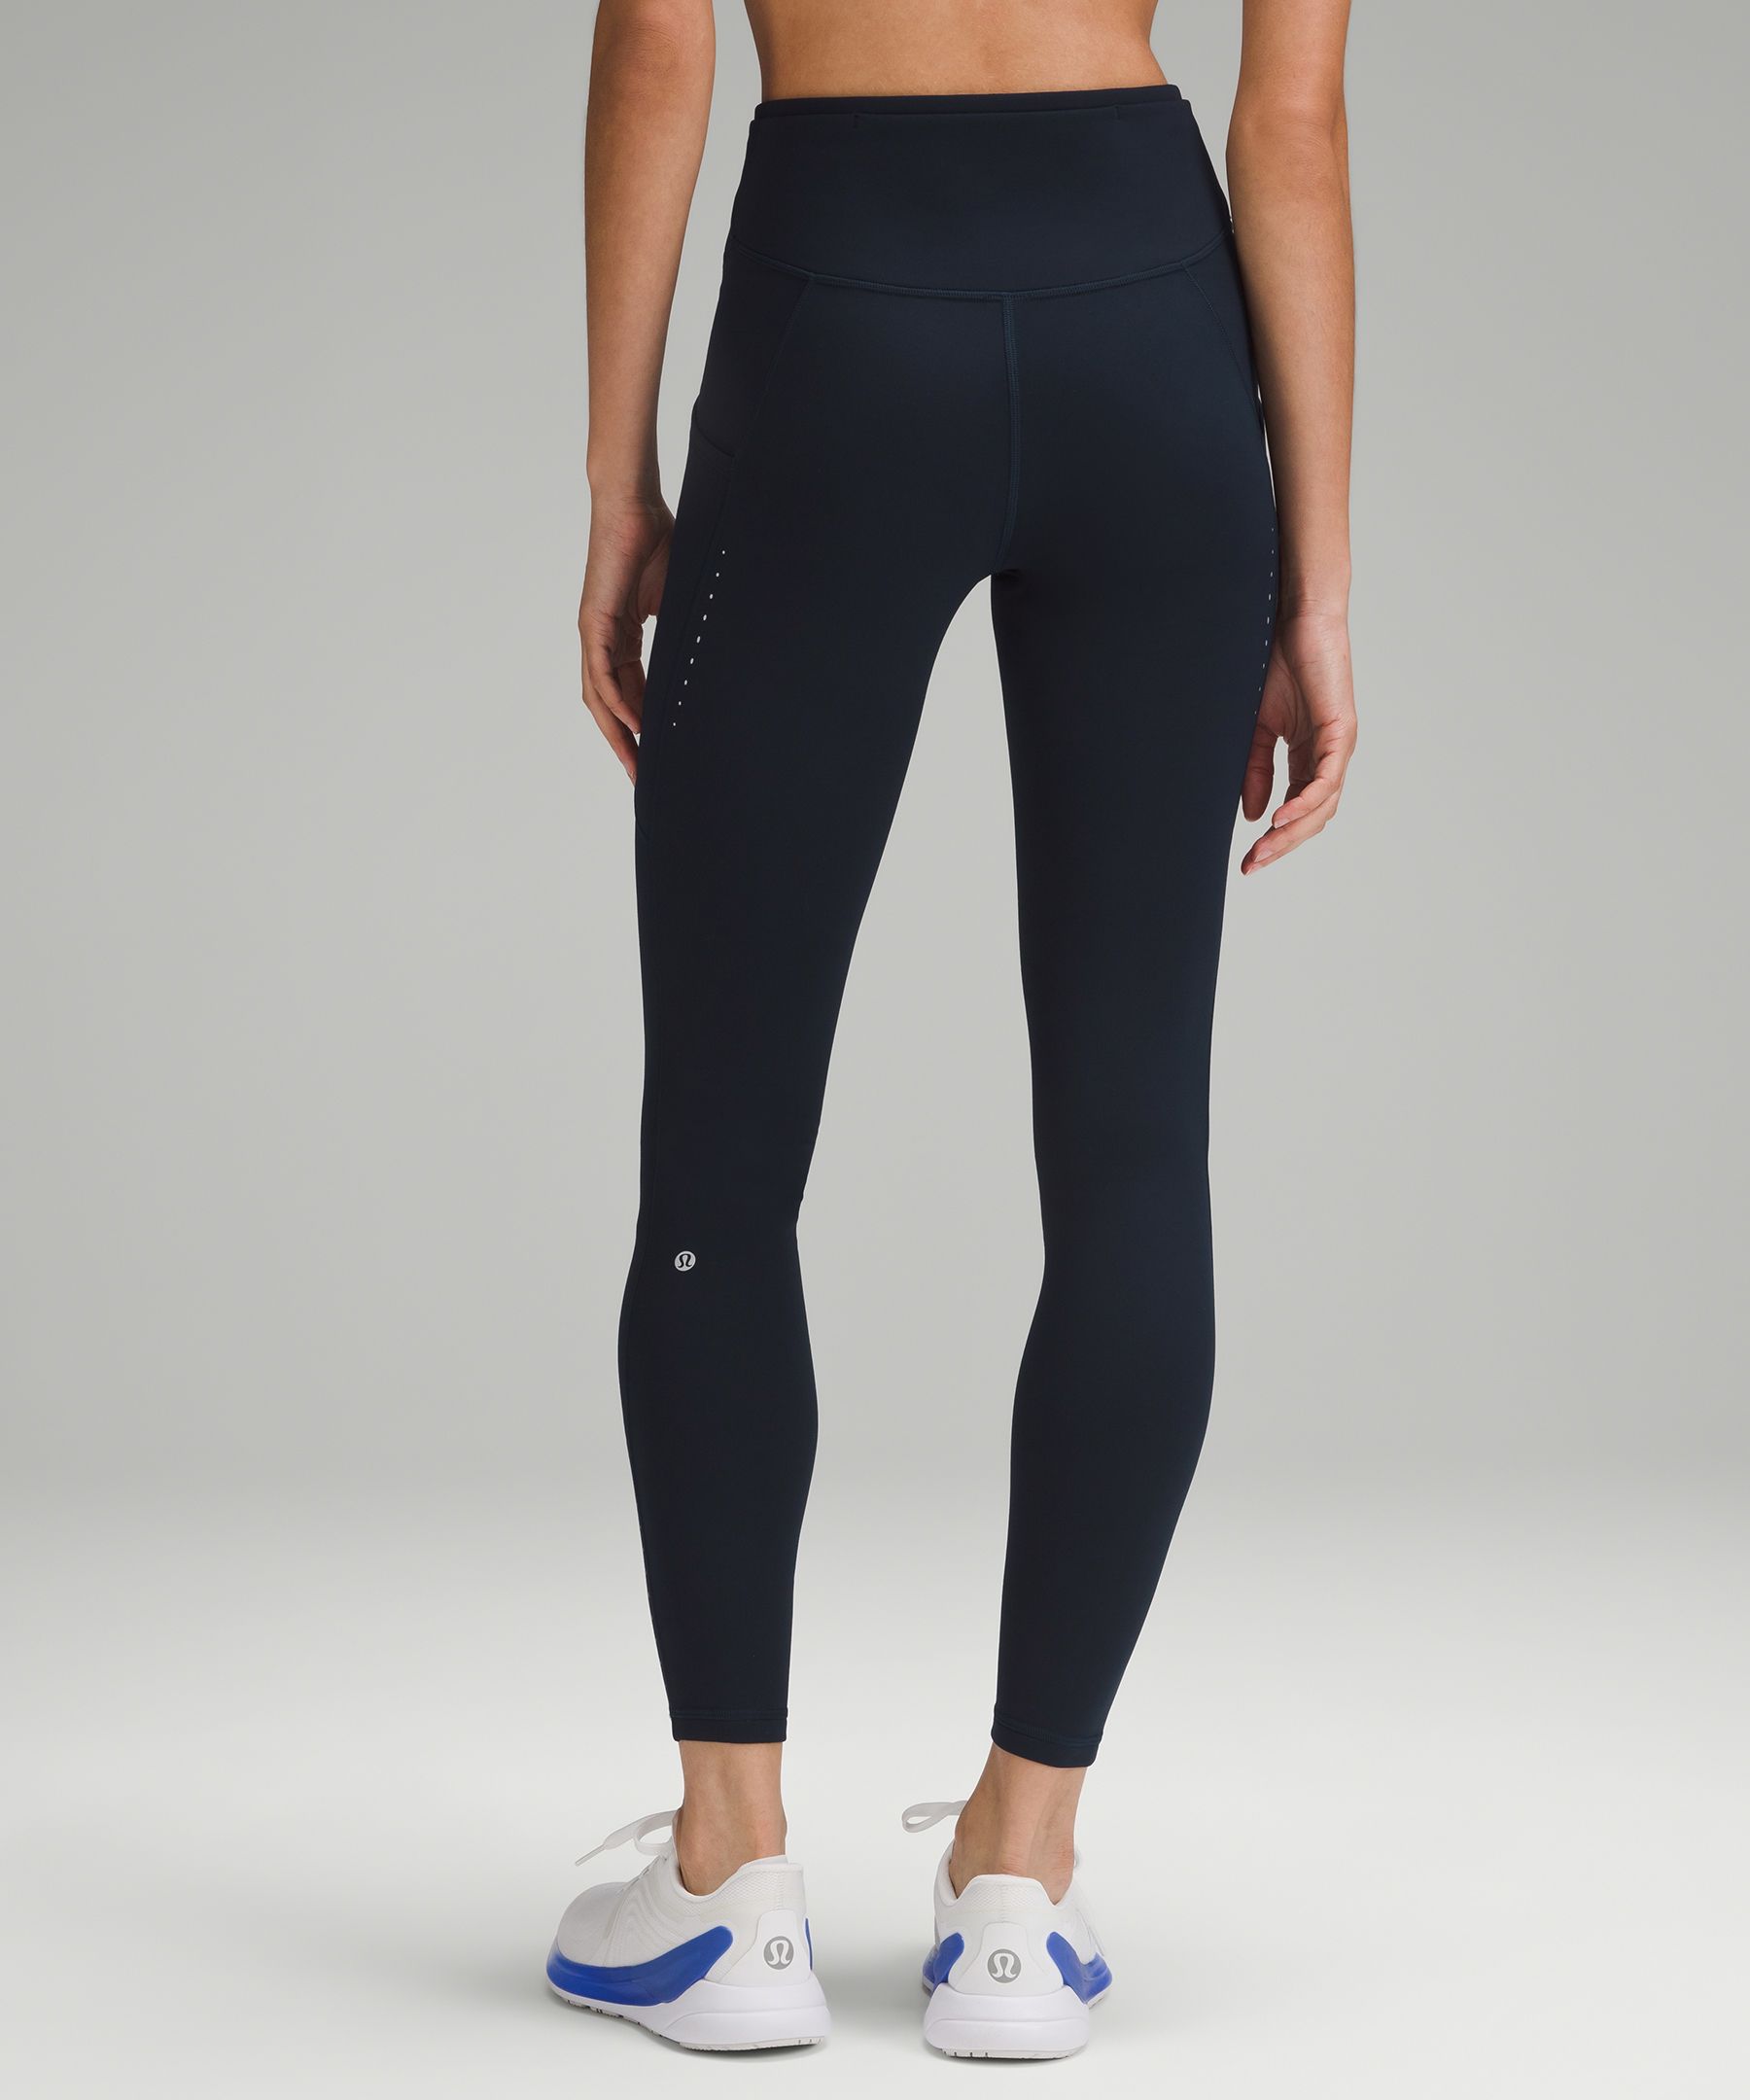 Lululemon athletica Fast and Free High-Rise Thermal Tight 28 *Pockets, Women's Leggings/Tights